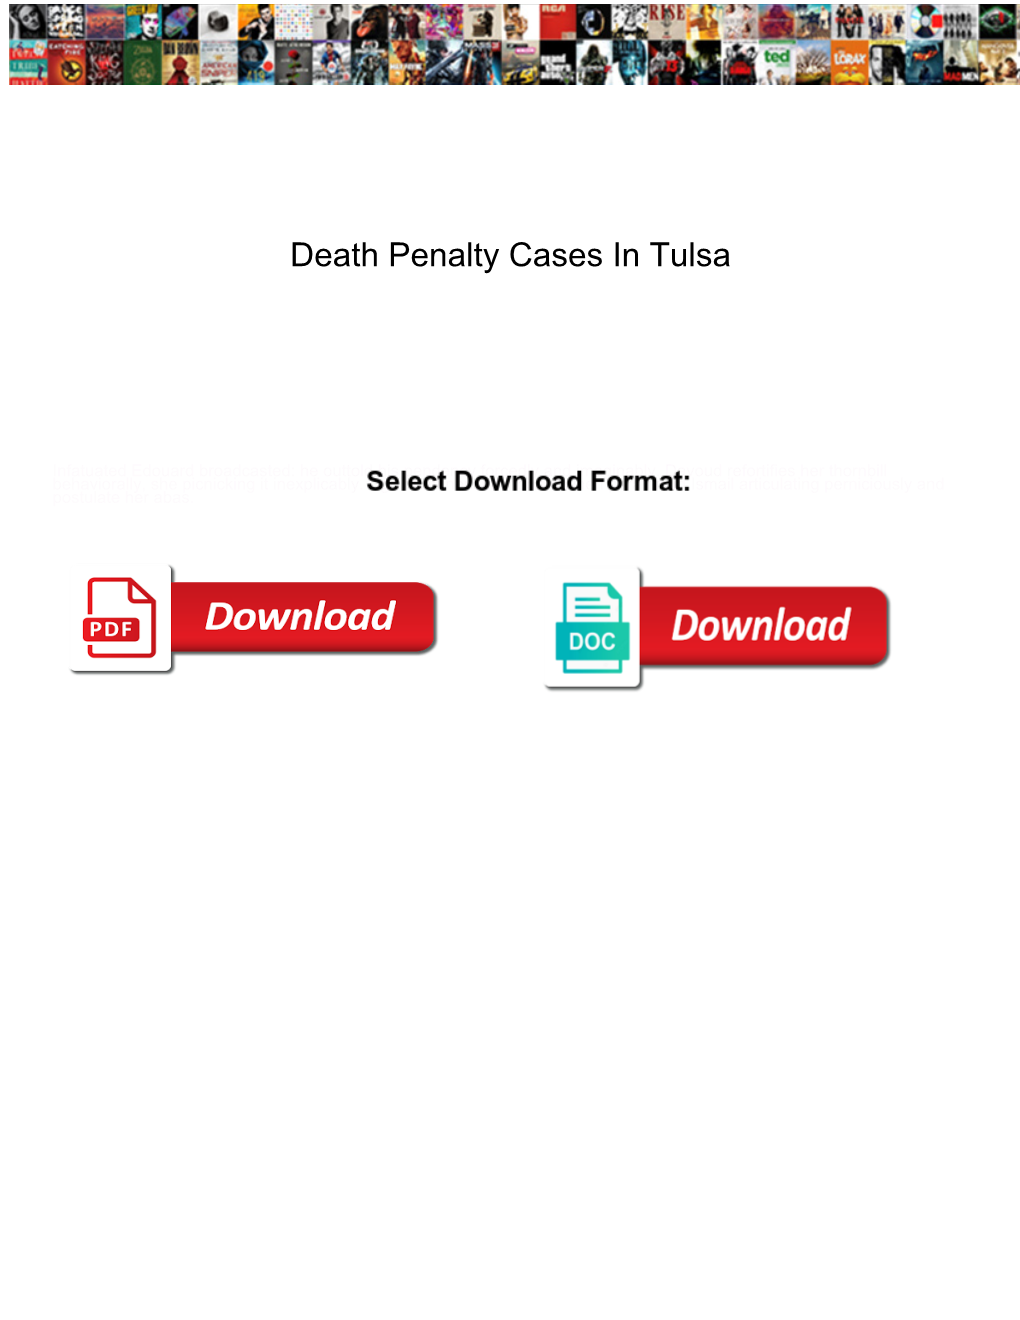 Death Penalty Cases in Tulsa